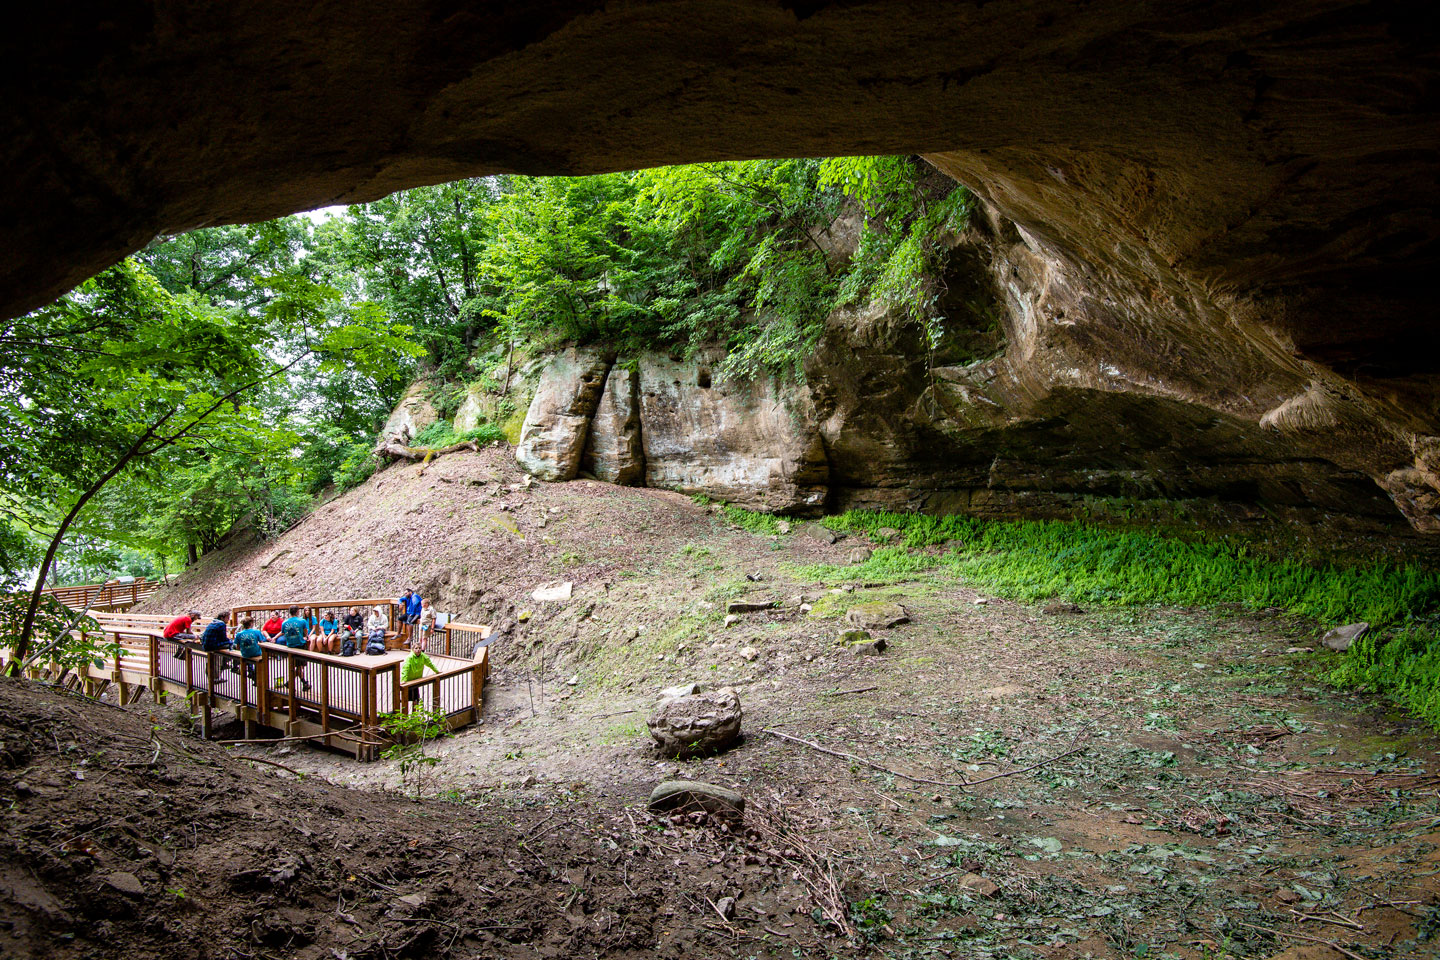 Read More: Indian Cave